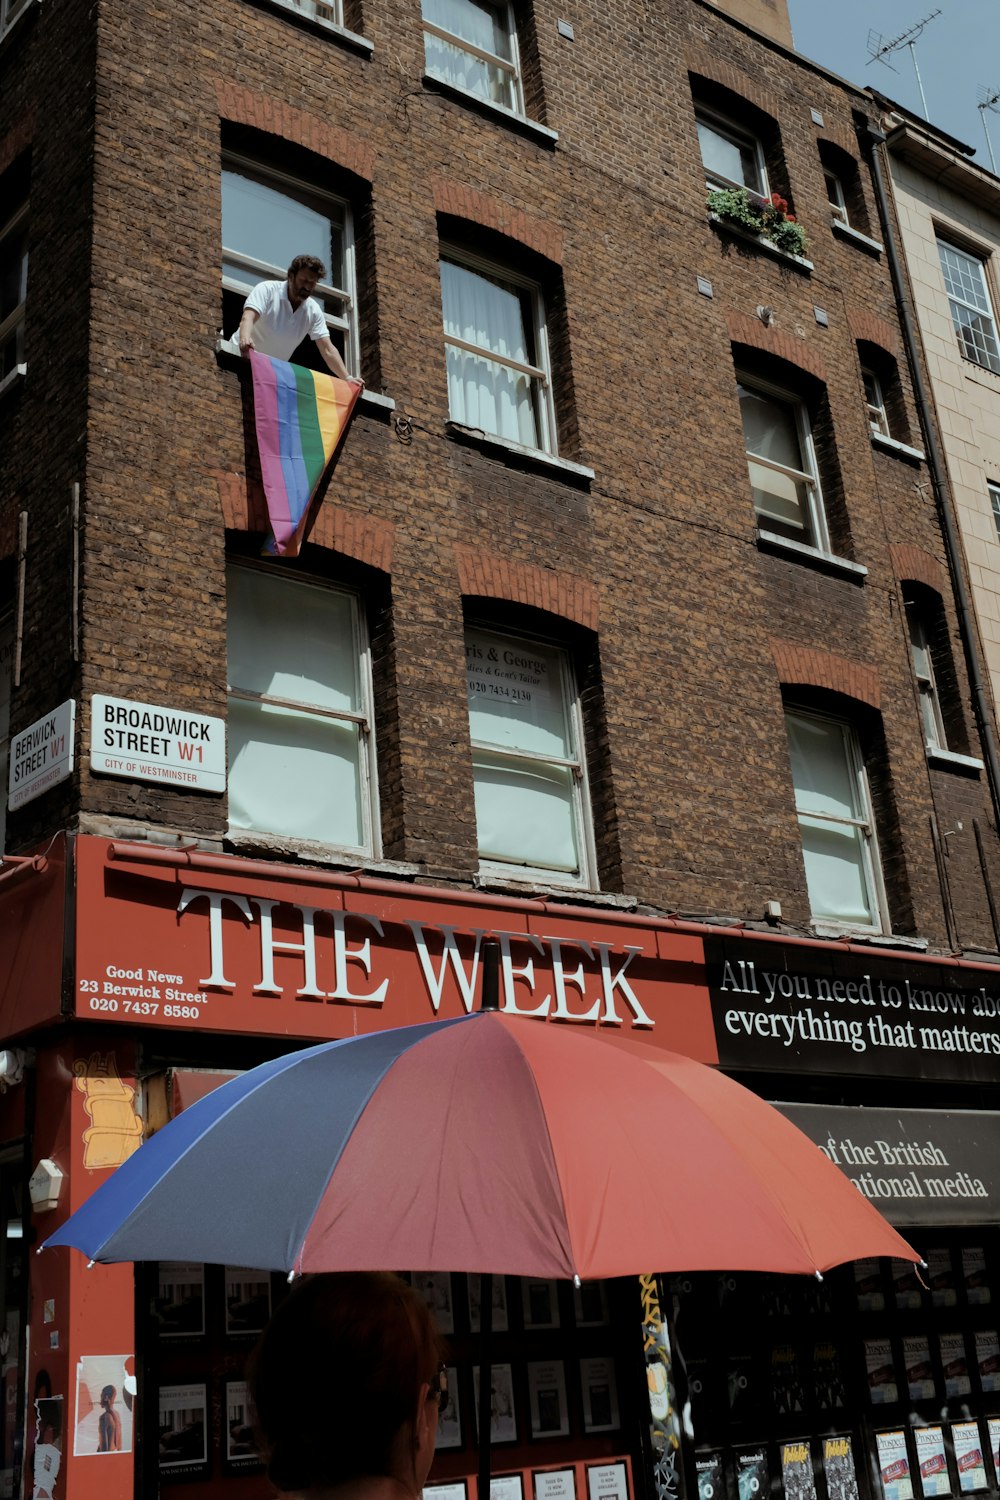 The Week sign on building at daytime